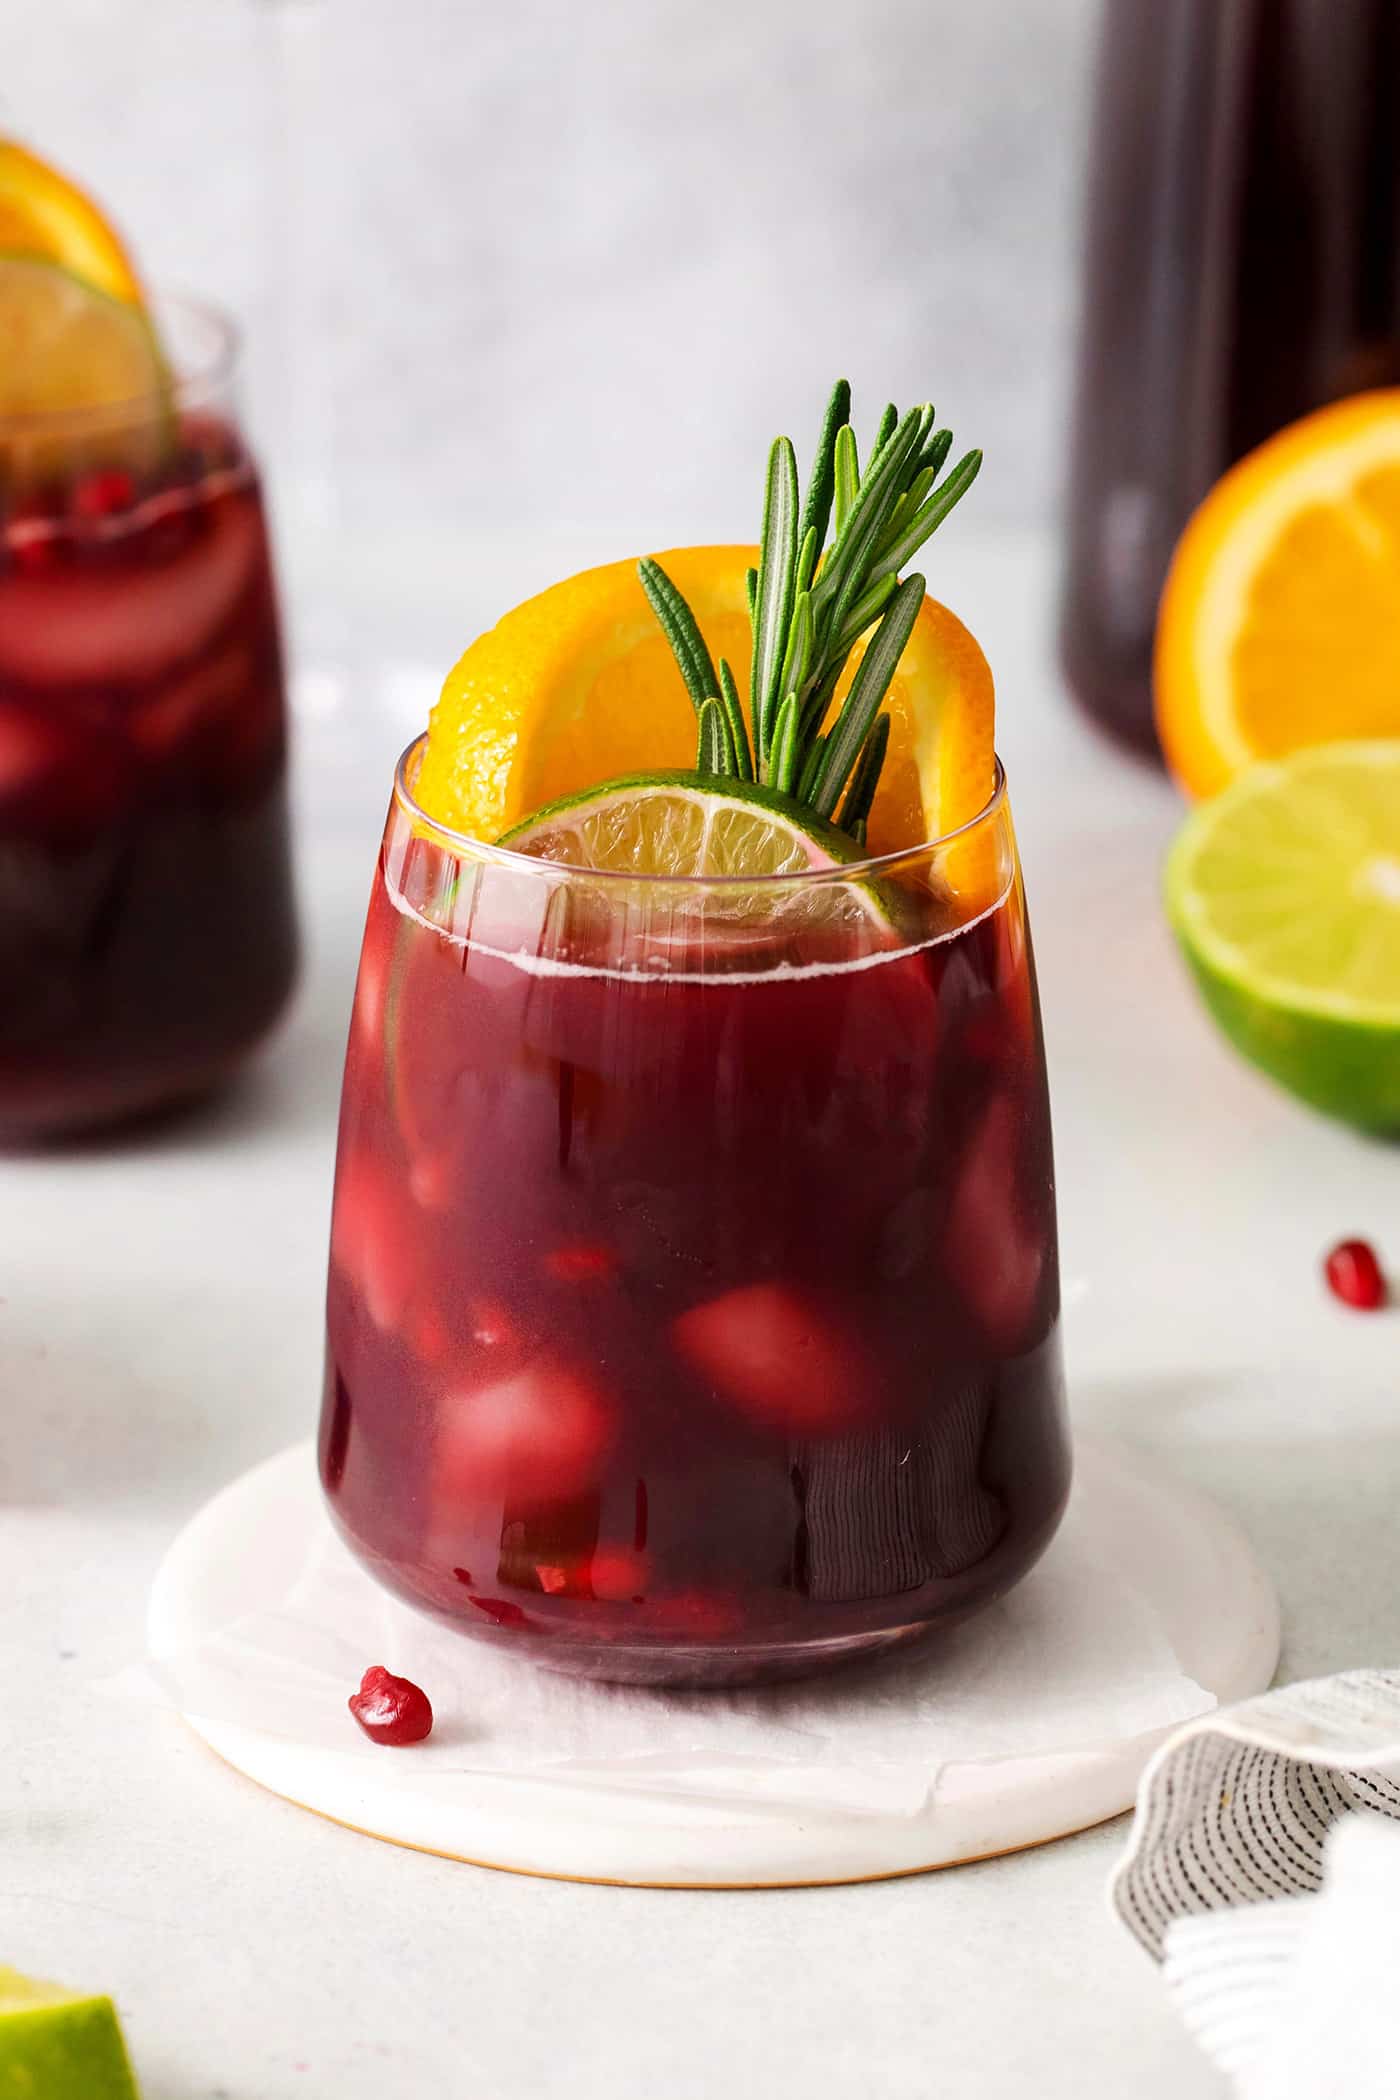 A glass of red Christmas sangria on a white background with cut oranges and limes, and garnished with orange slices and fresh rosemary.